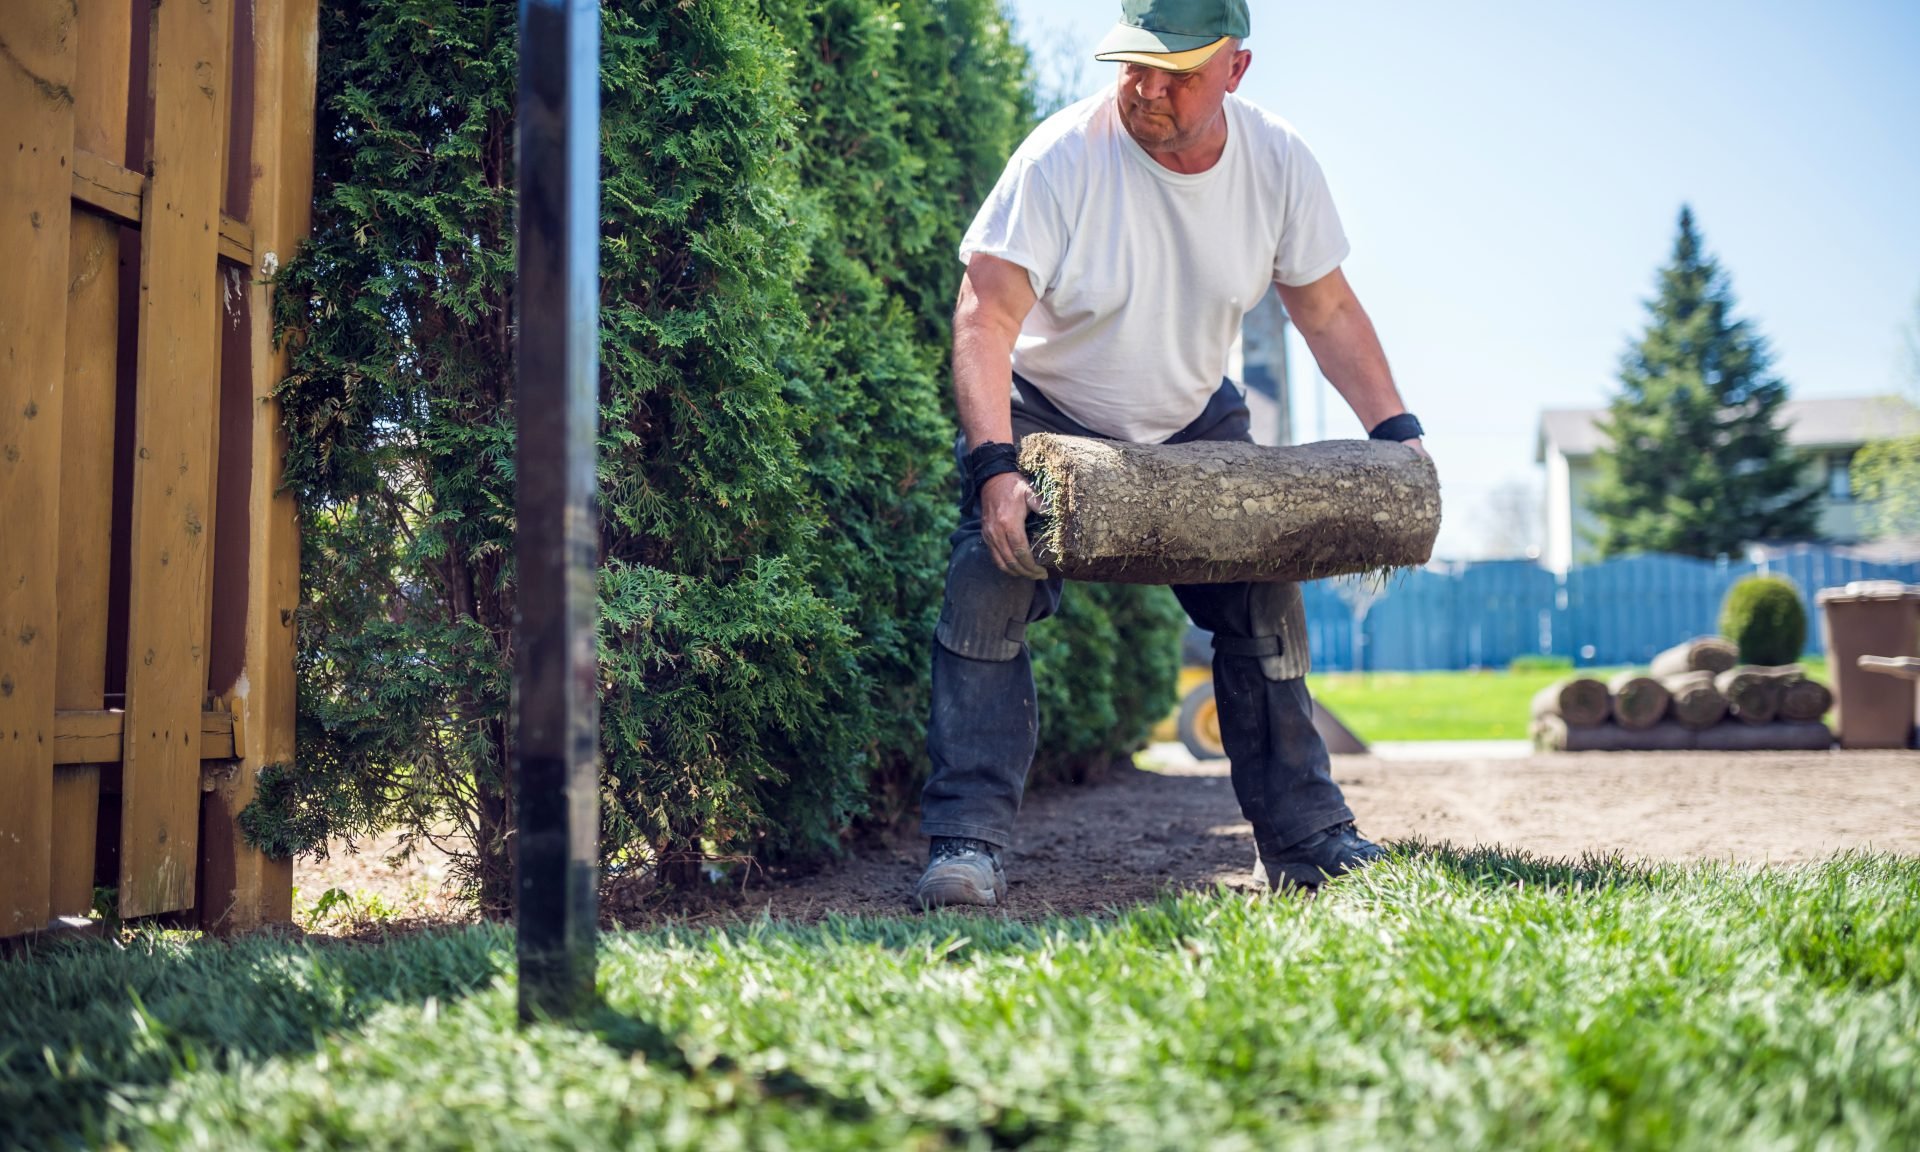 A Landscaping Or Lawn Care Business, Landscaping Hourly Rate